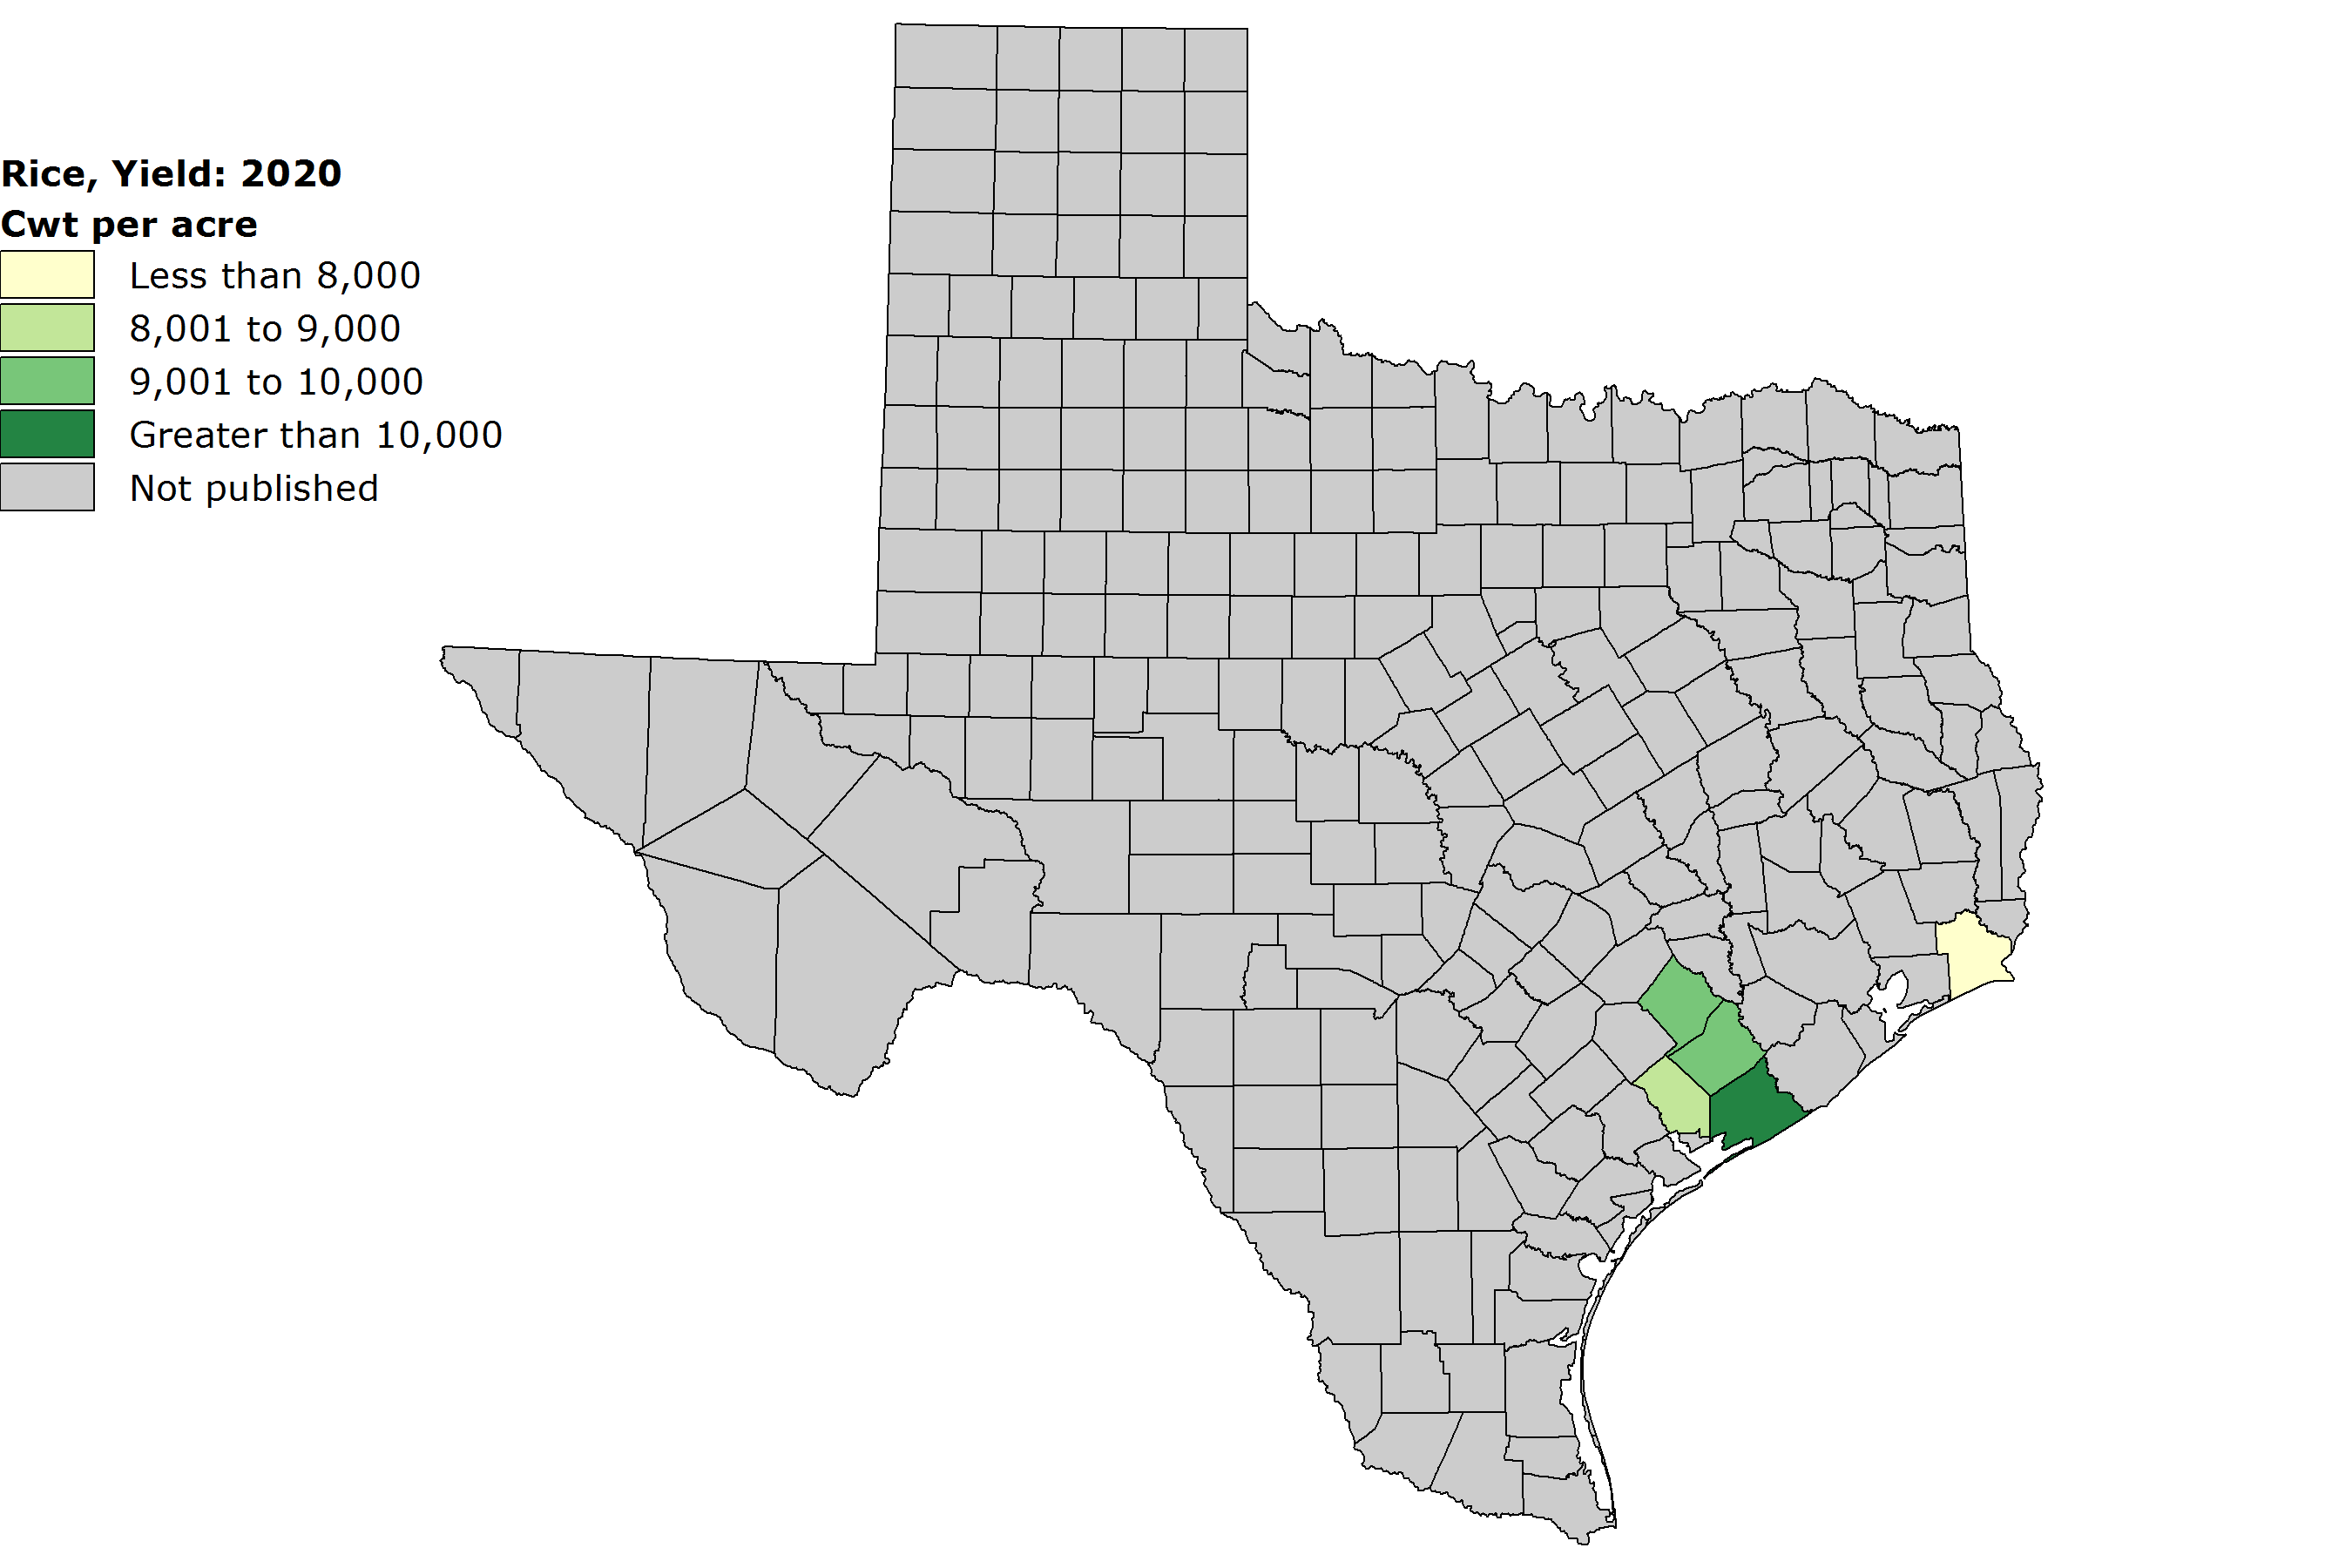 A shaded map of Texas showing the average yield of rice, hundreadweight per acre by county.